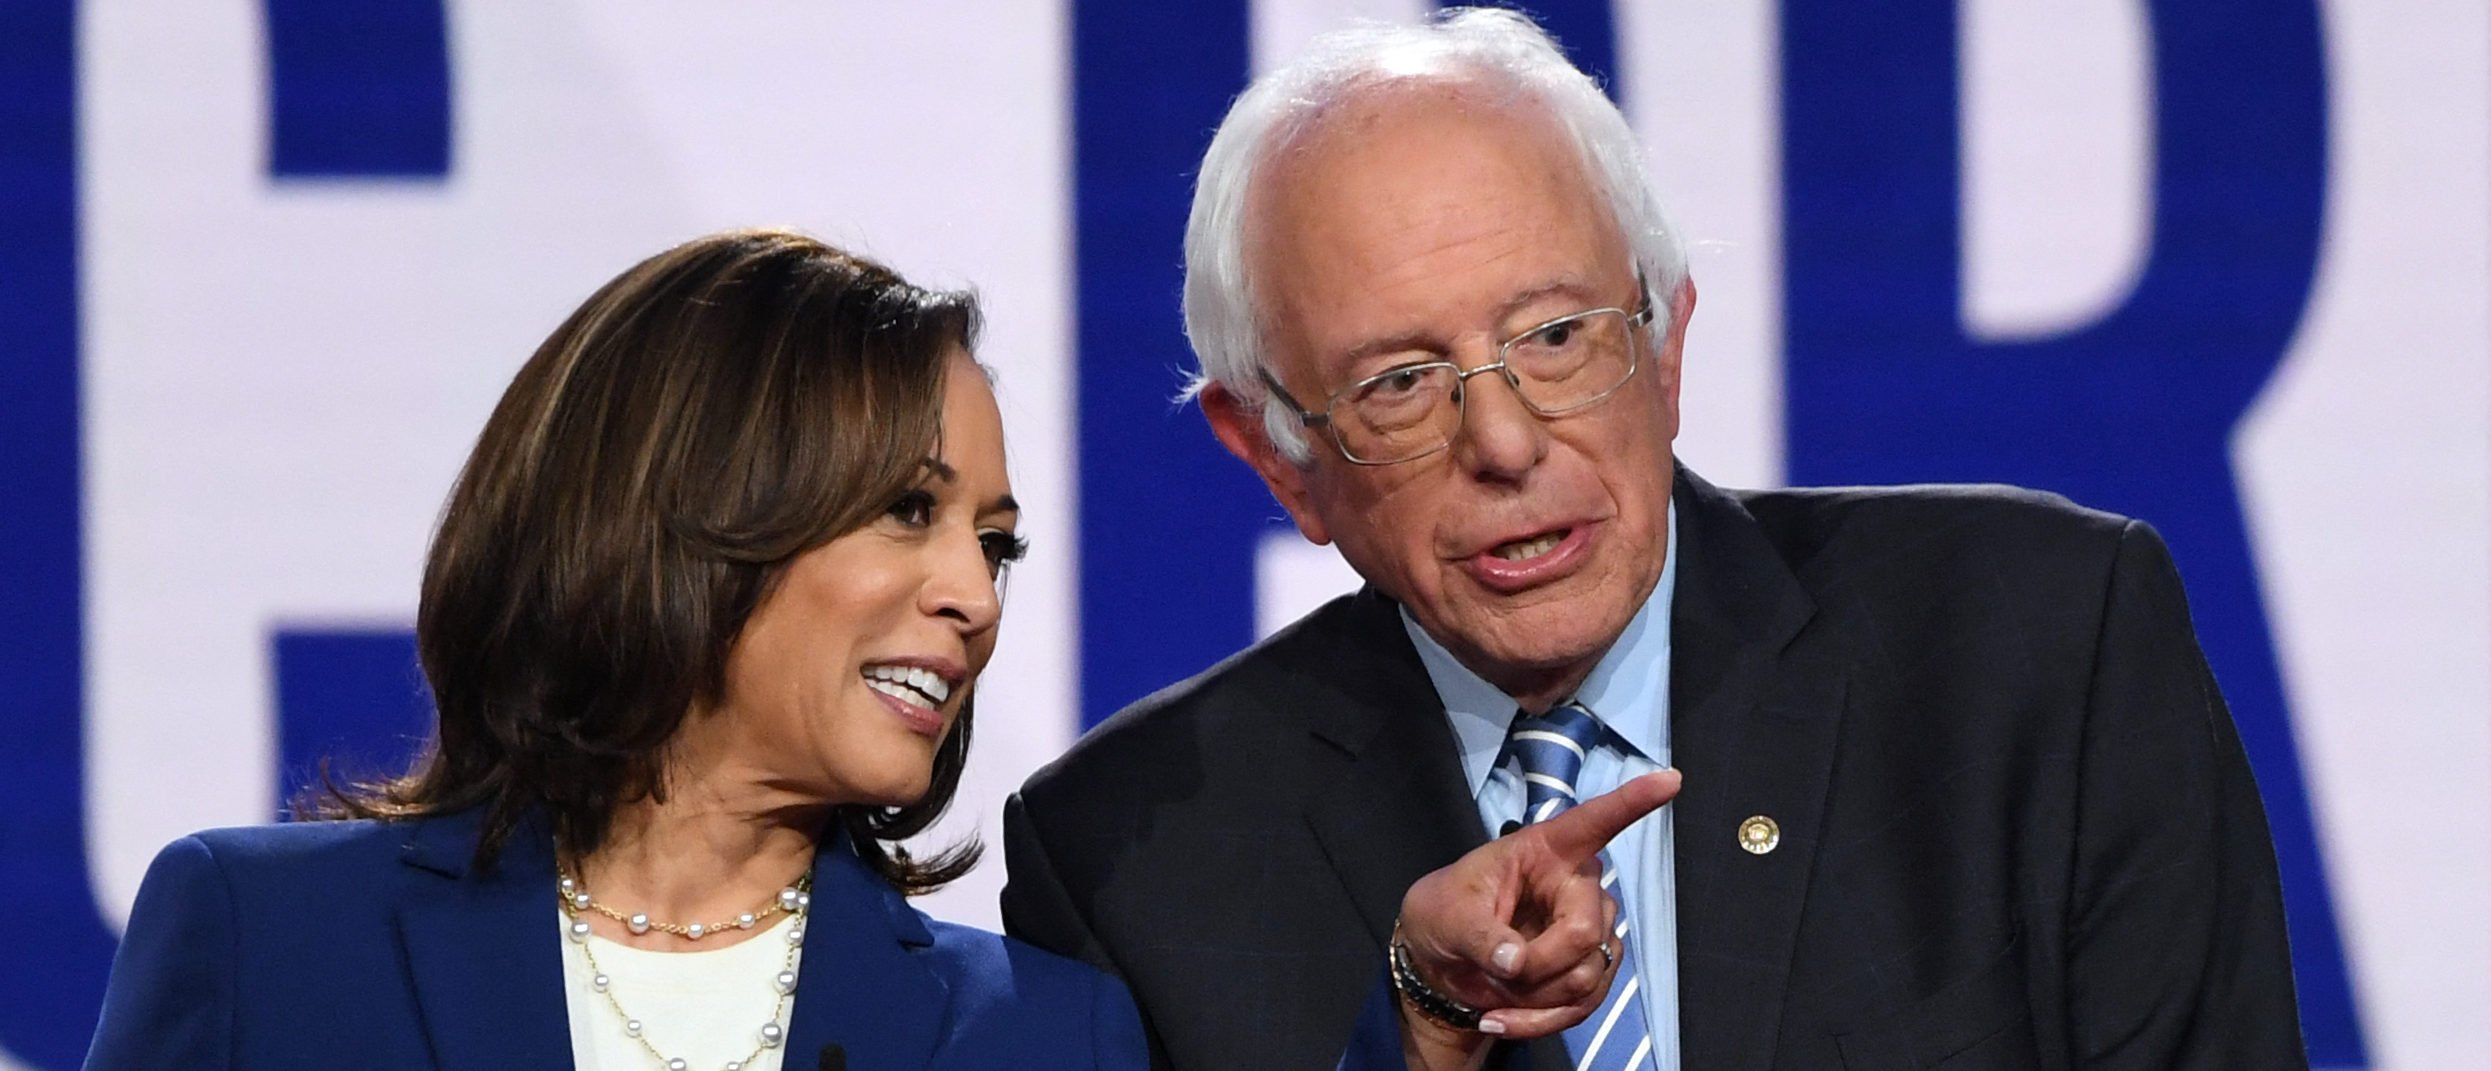 Democratic presidential hopefuls California Senator Kamala Harris (L) and Vermont Senator Bernie Sanders speak as they arrive onstage for the fourth Democratic primary debate of the 2020 presidential campaign season co-hosted by The New York Times and CNN at Otterbein University in Westerville, Ohio on October 15, 2019.